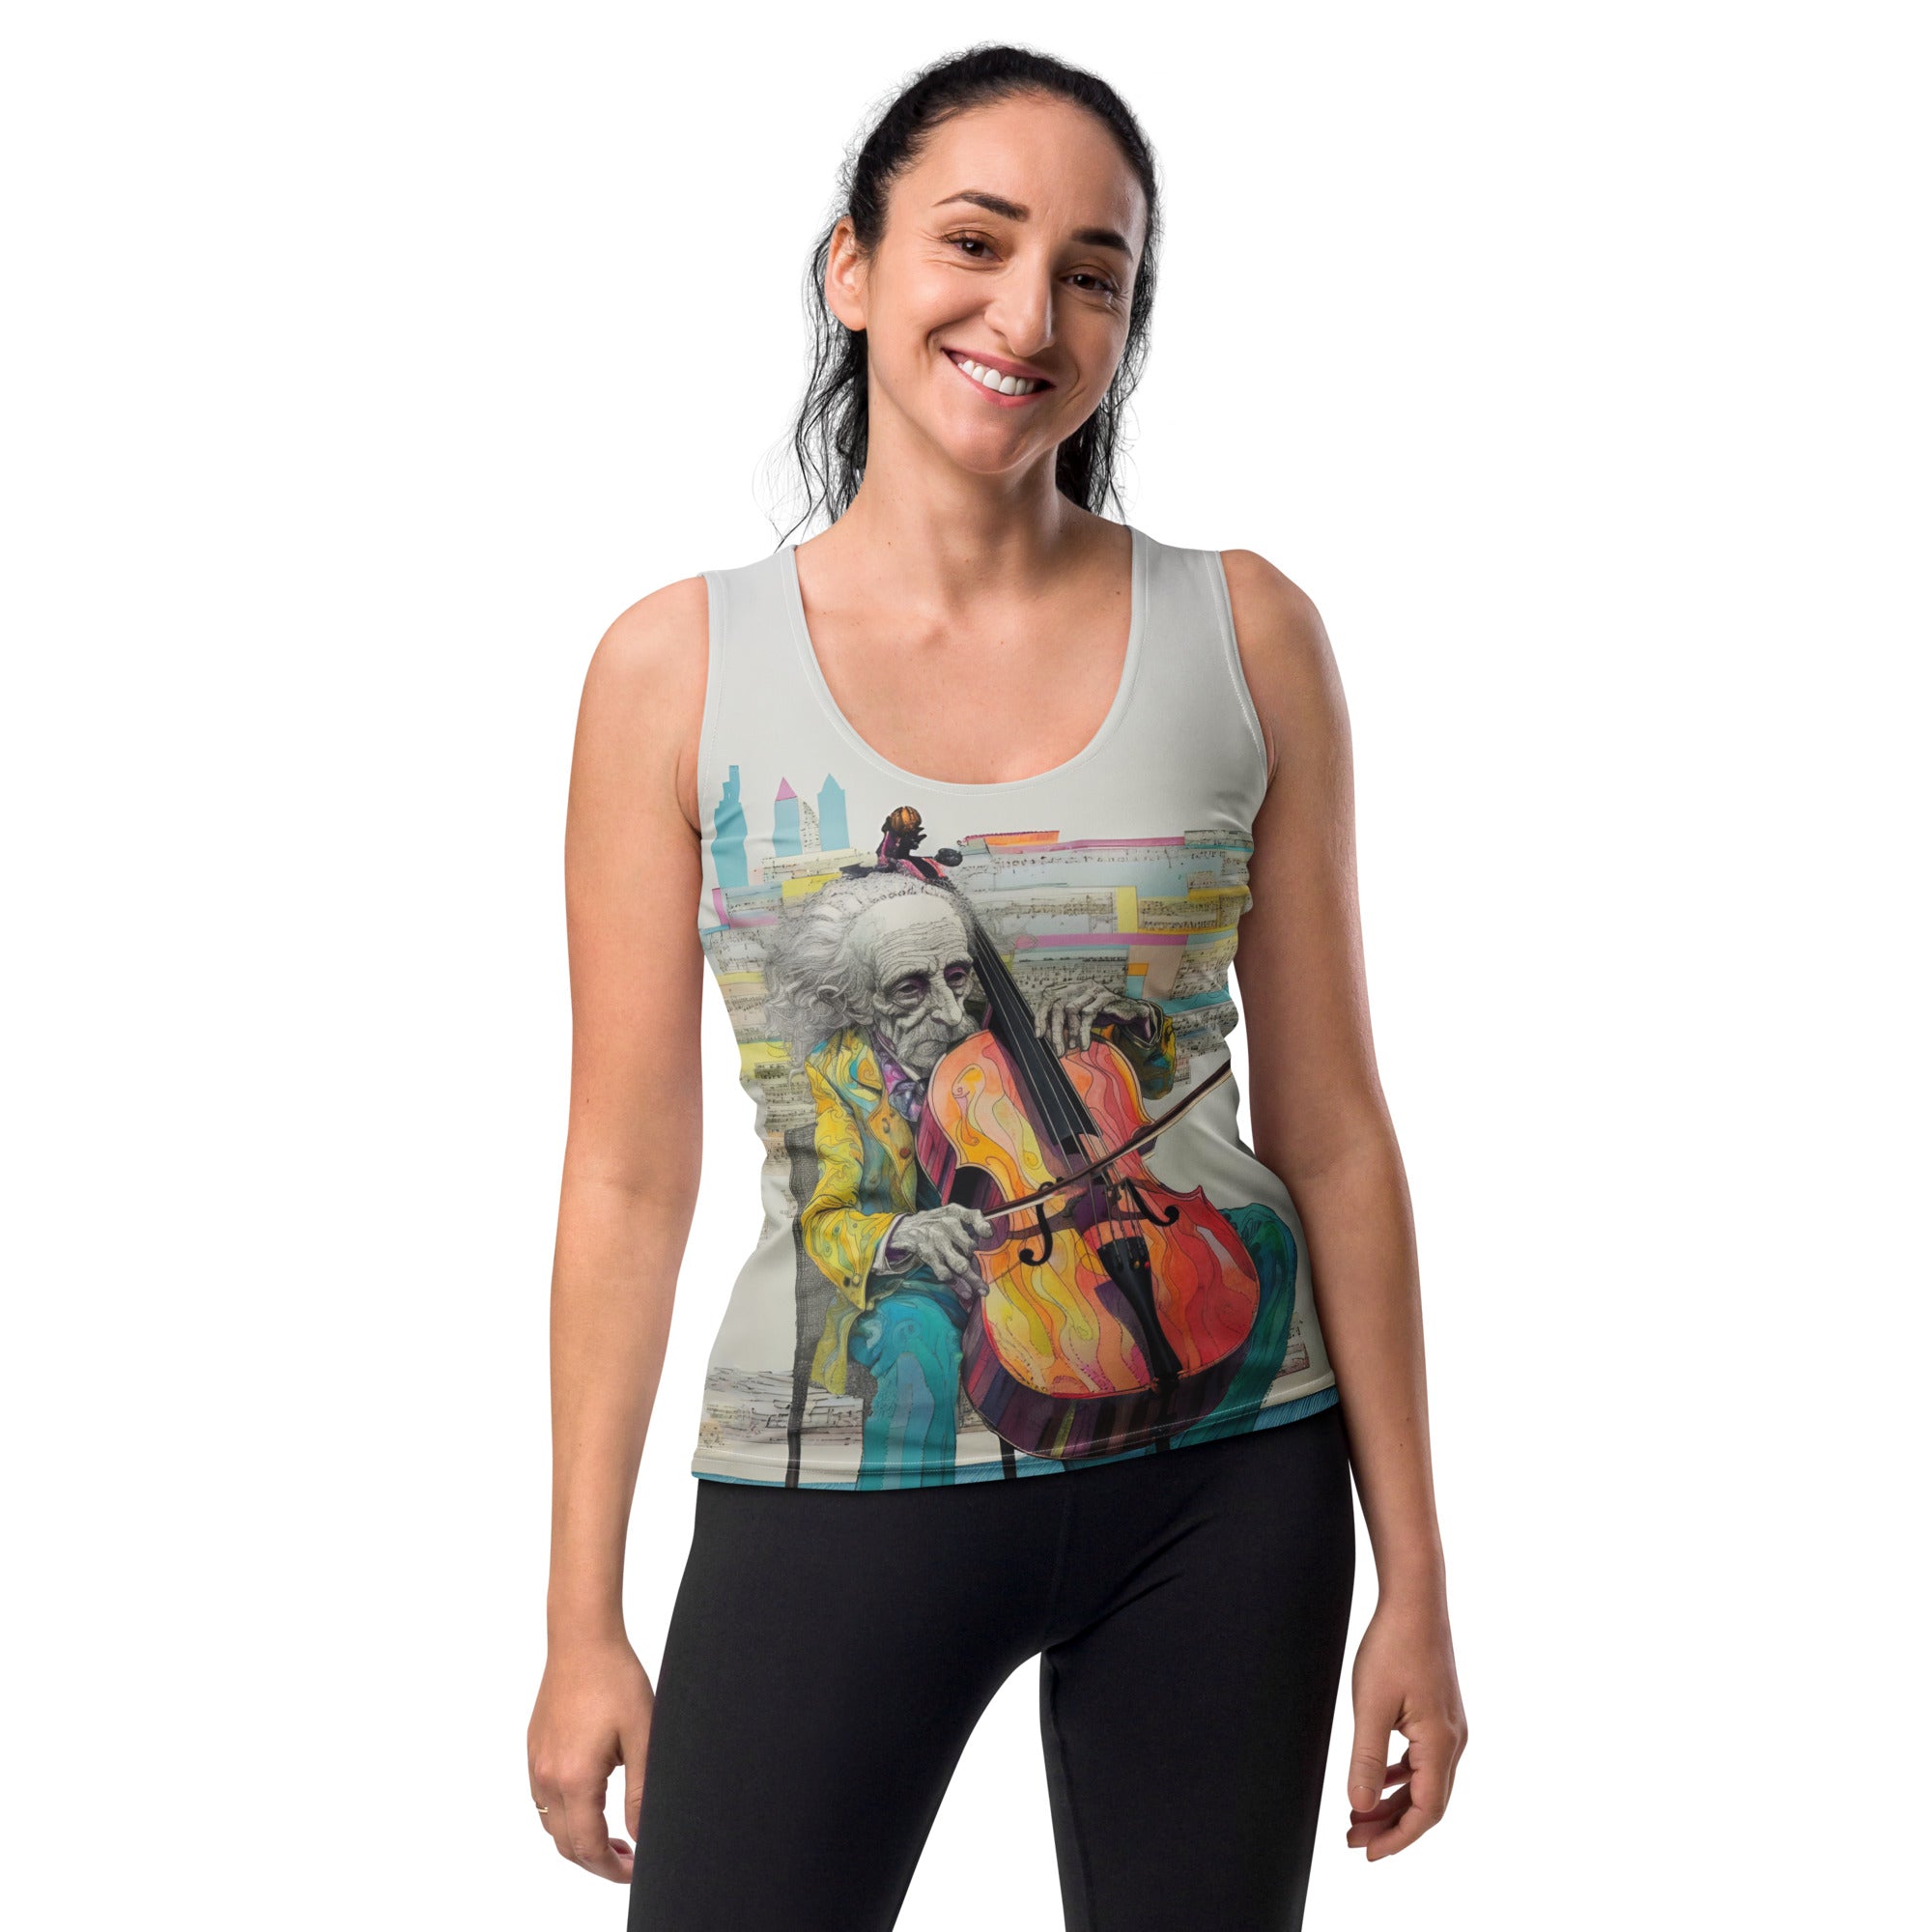 Melodic Waves Women's Tank Top with soothing wave design.